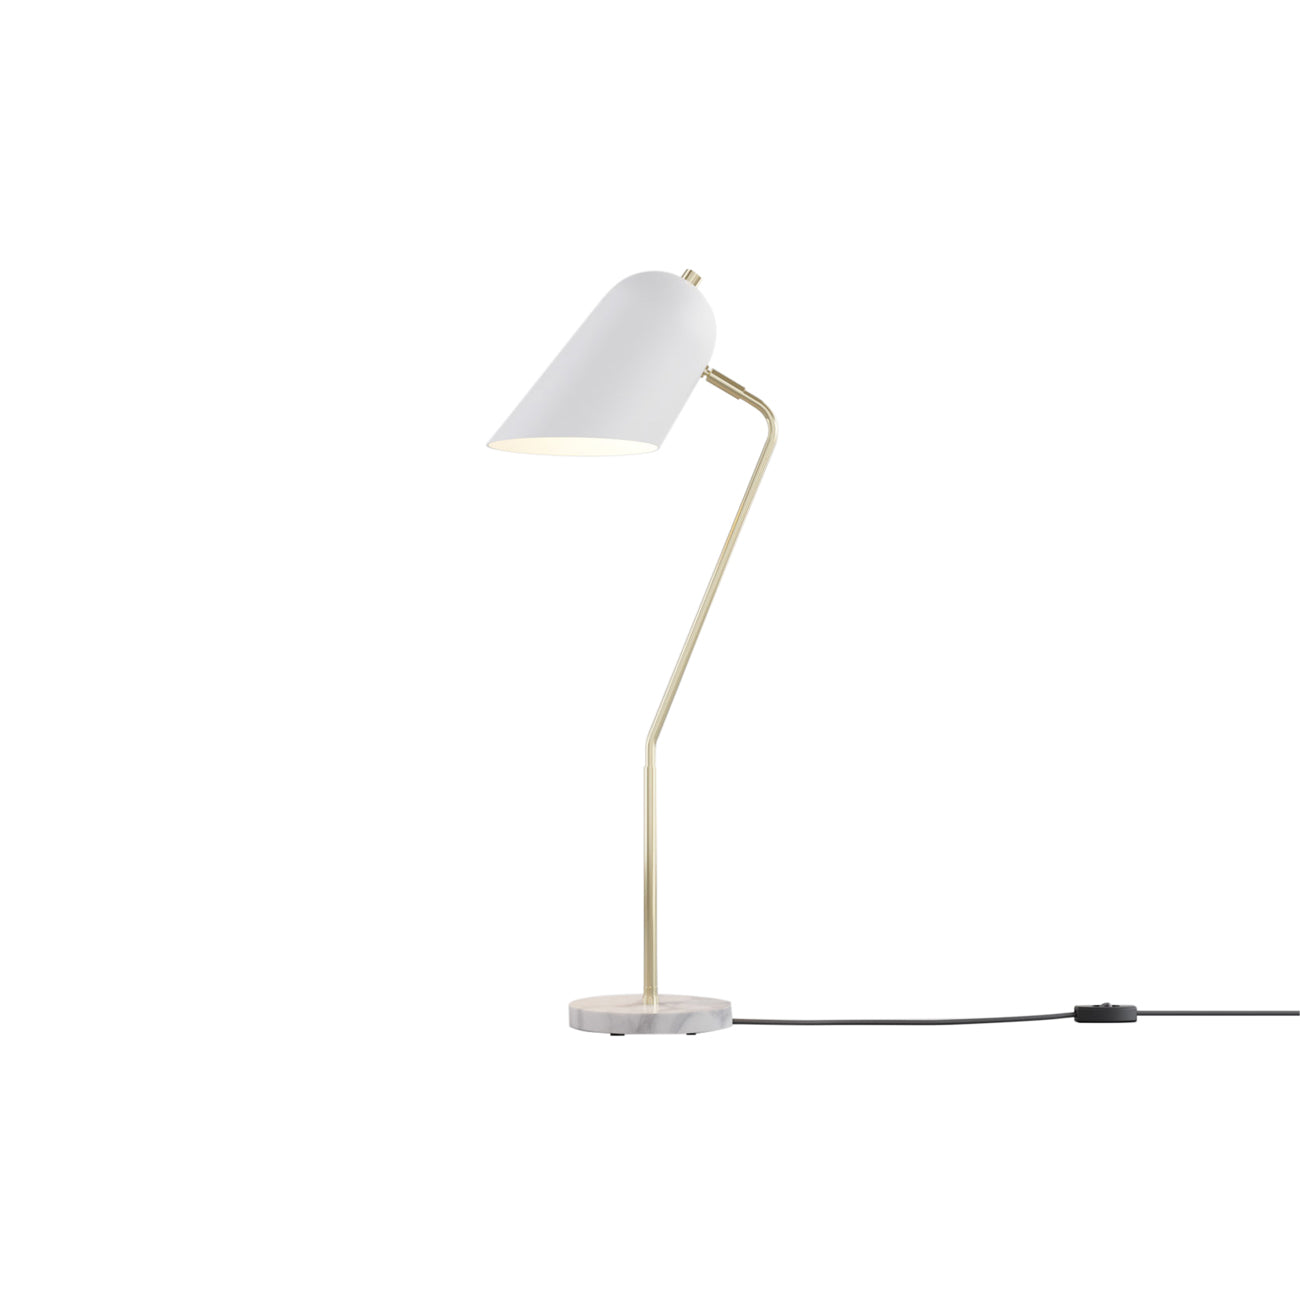 Cliff Table Lamp: White + Brass